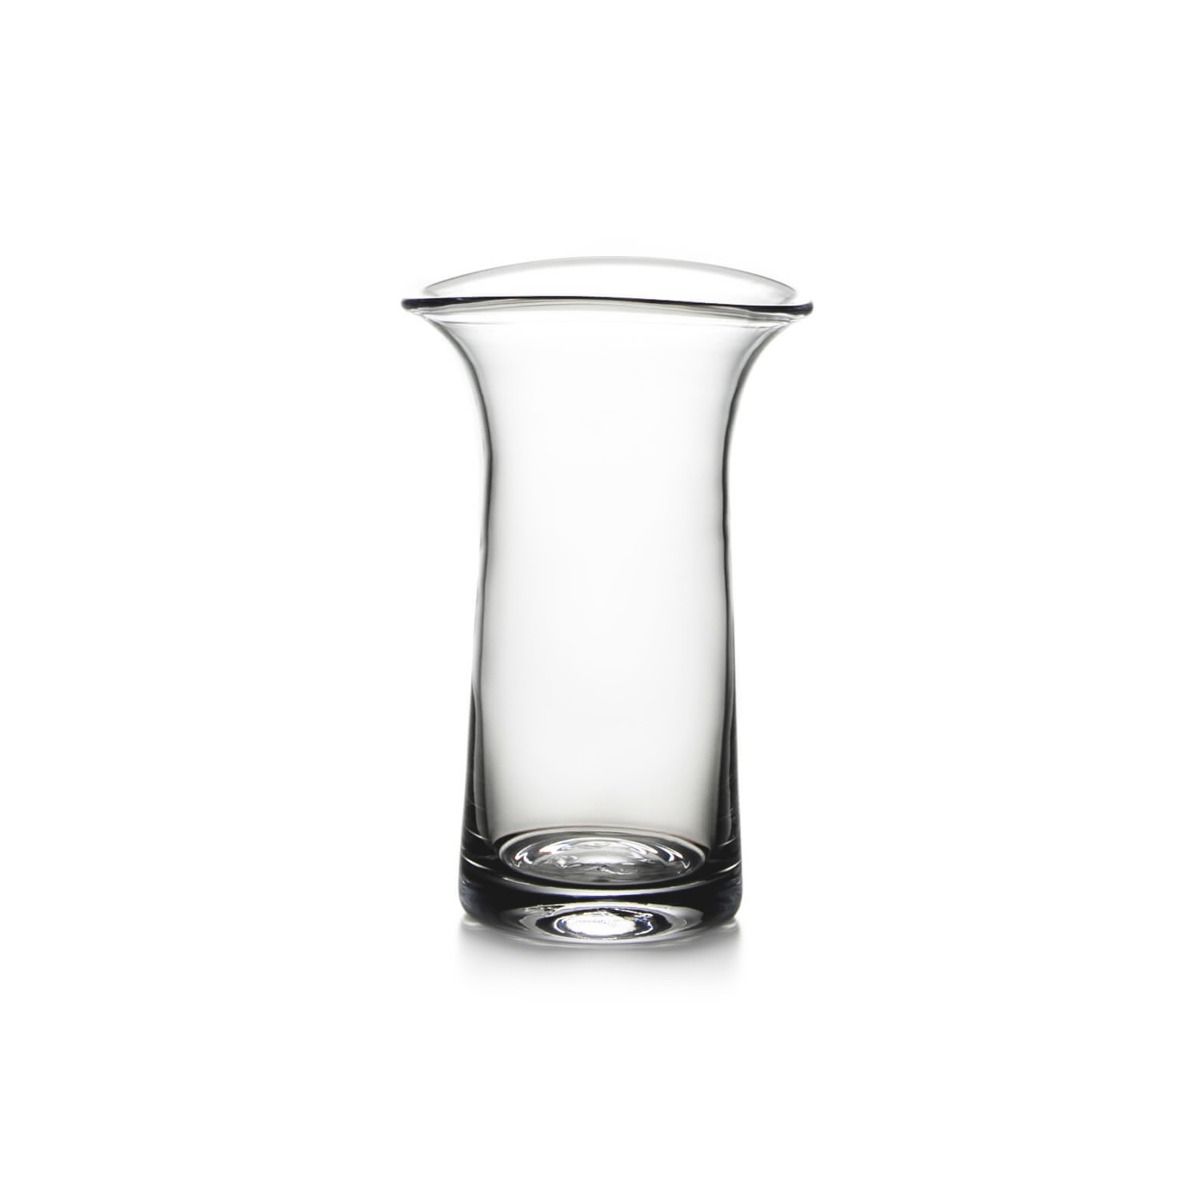 SIMON PEARCE VASE BARRE (Available in 2 Sizes)